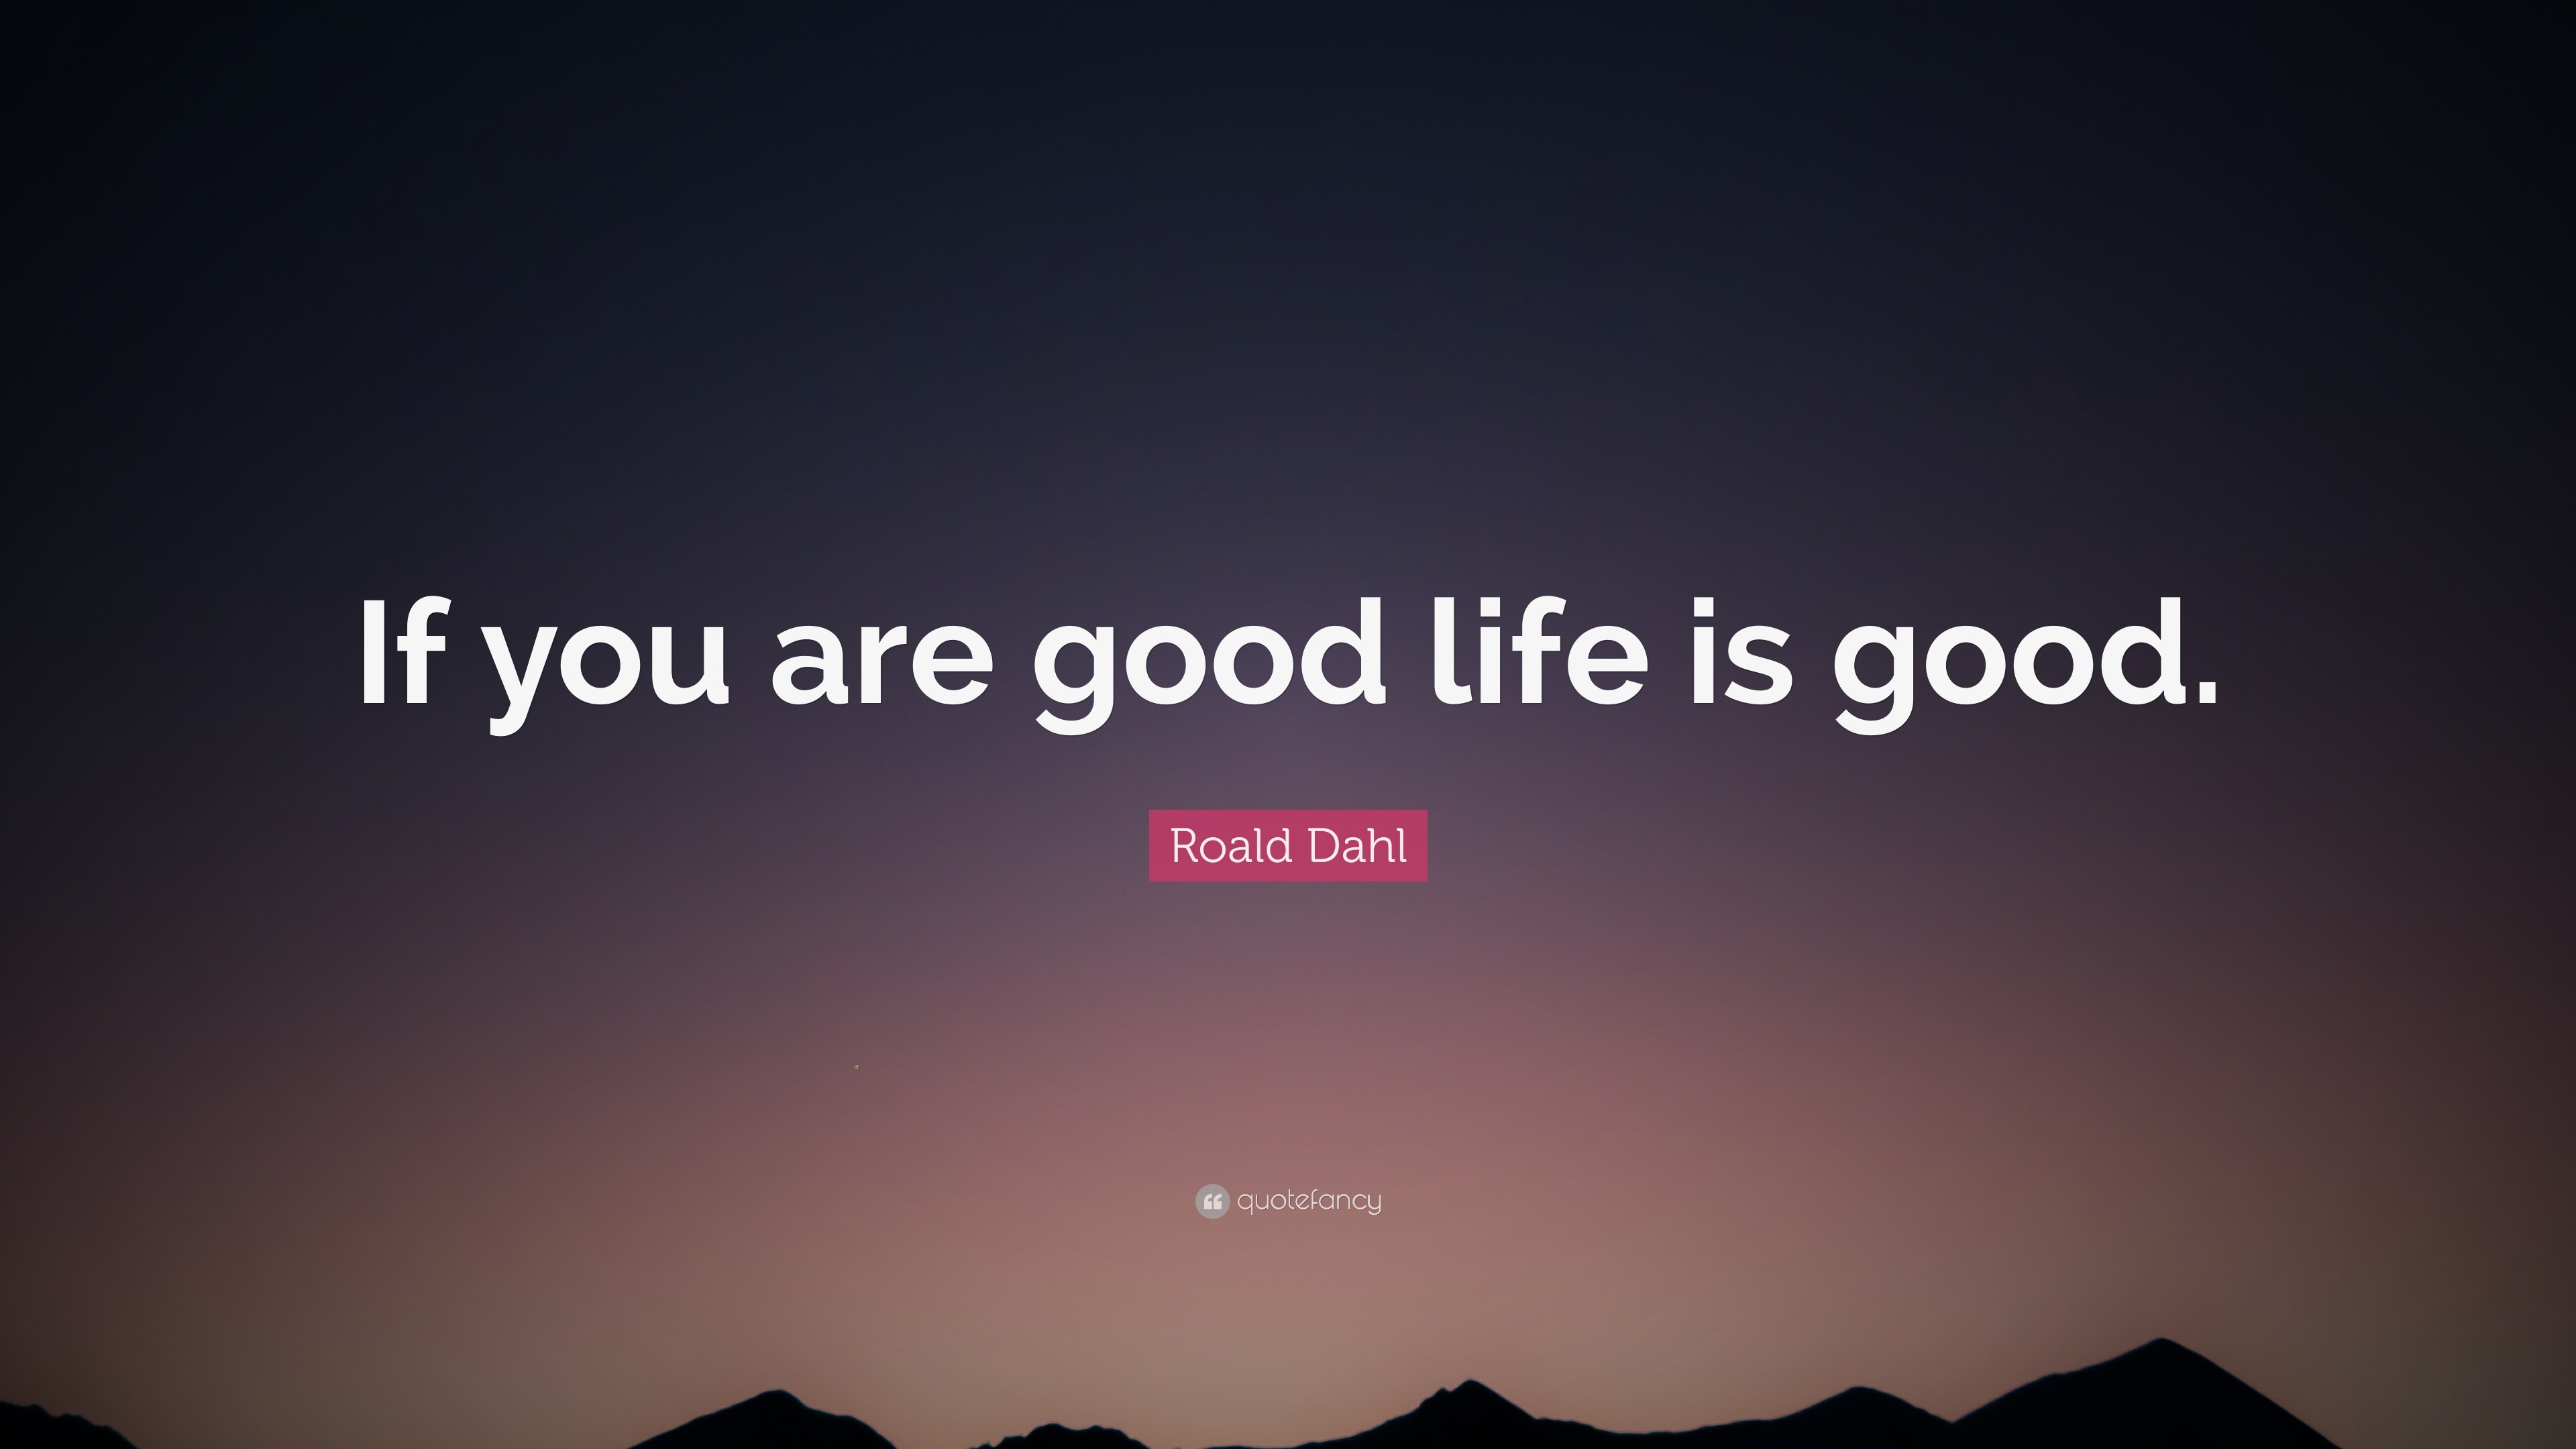 Roald Dahl Quote “If you are good life is good ”